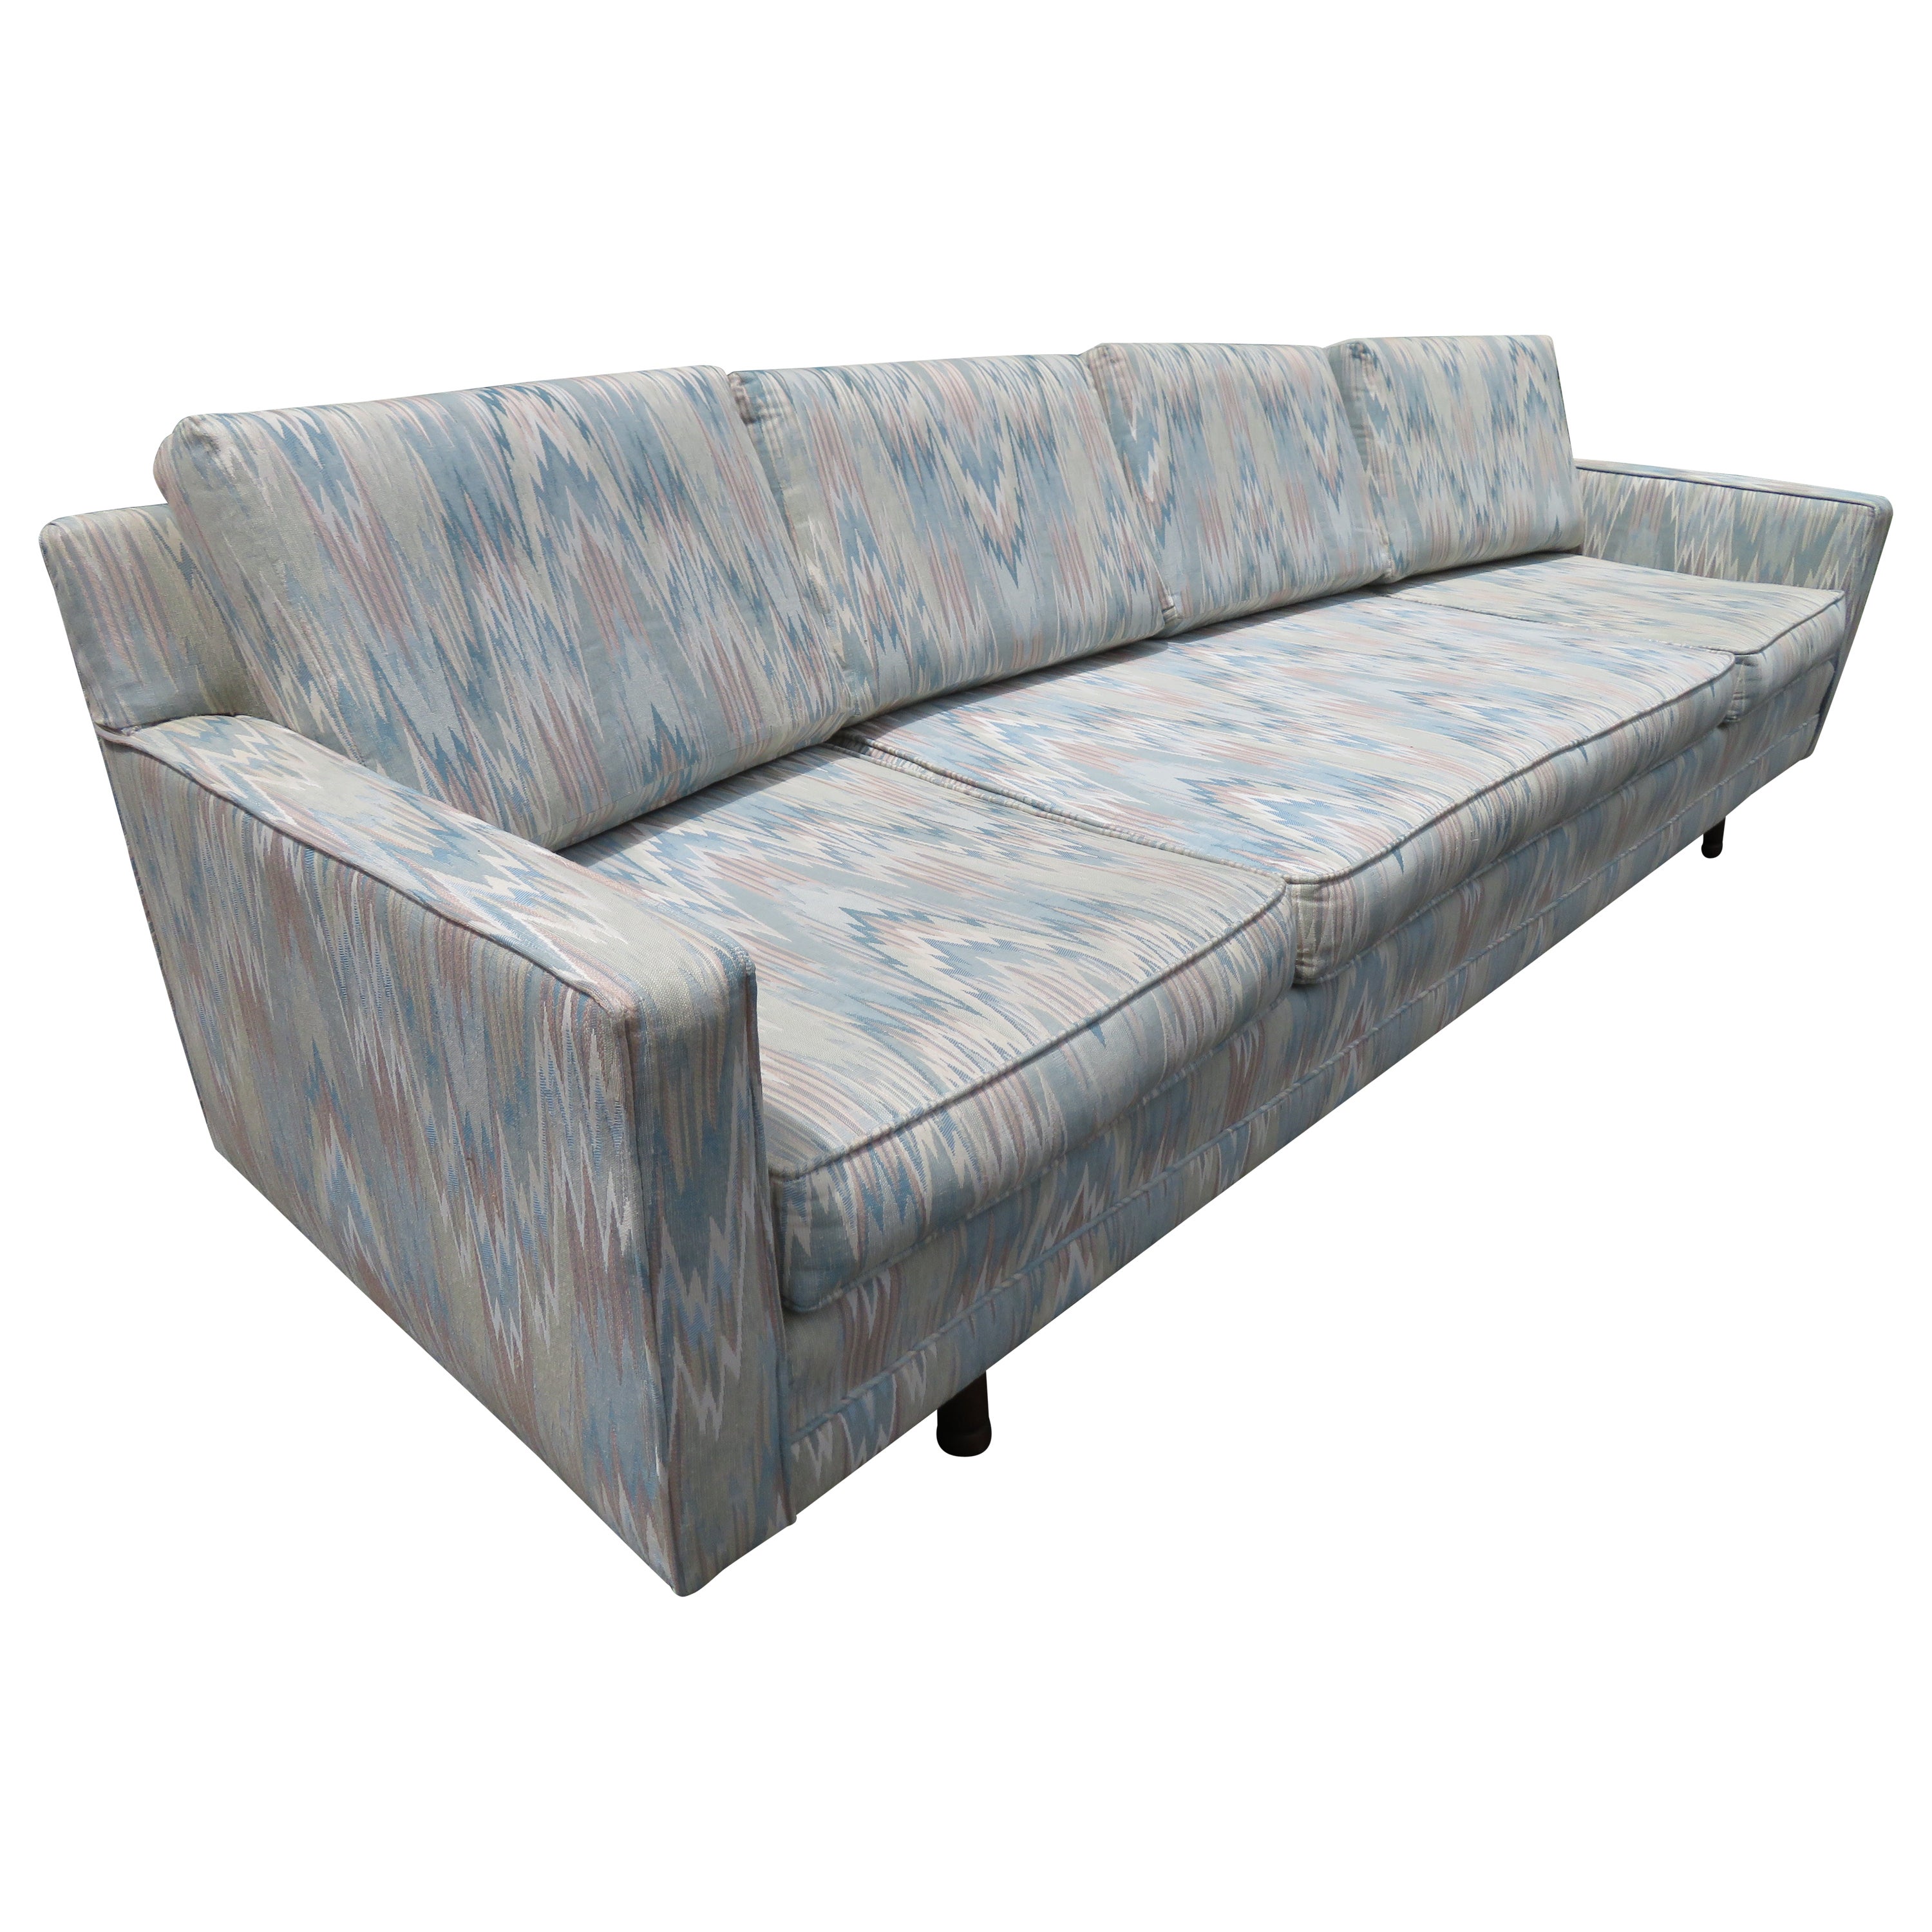 Handsome Wormley Dunbar Style Curved 4 Seater Sofa Mid-Century Modern For Sale